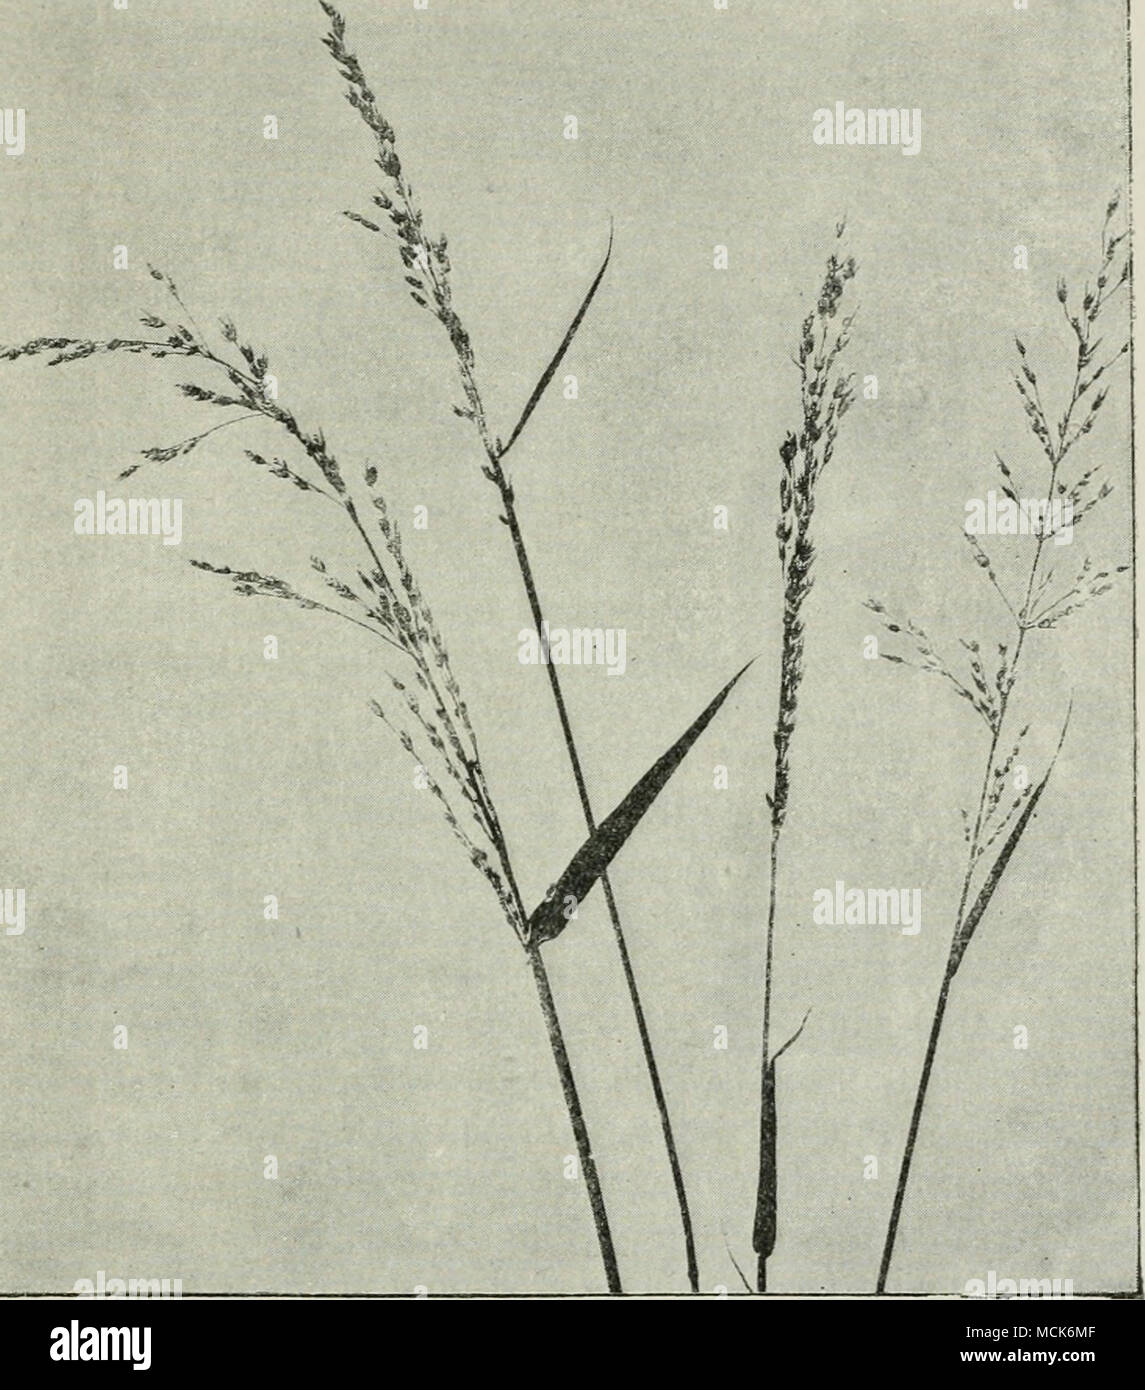 . Fig. 157.—Ustilago perennans on Arrhenatherum elatius (Oat grass). The grains are transformed into black smut-masses; the appearance of the infected spikelets is qviite distinct from that of the healthy one to the right, (v. Tiibeuf phot.) with Brefeld's view, that the fungus is introduced into fields with fresh farmyard manure. Kellermann and Swingle have found a smut on oat.s in America wliicli they distinguish as Ust. avenae var. levis. Ust. Kolleri Wiile. This is another species of oat-smut recently dis- tinguished ; it has smooth spores, and is said to cause even greater damage than Ust Stock Photo